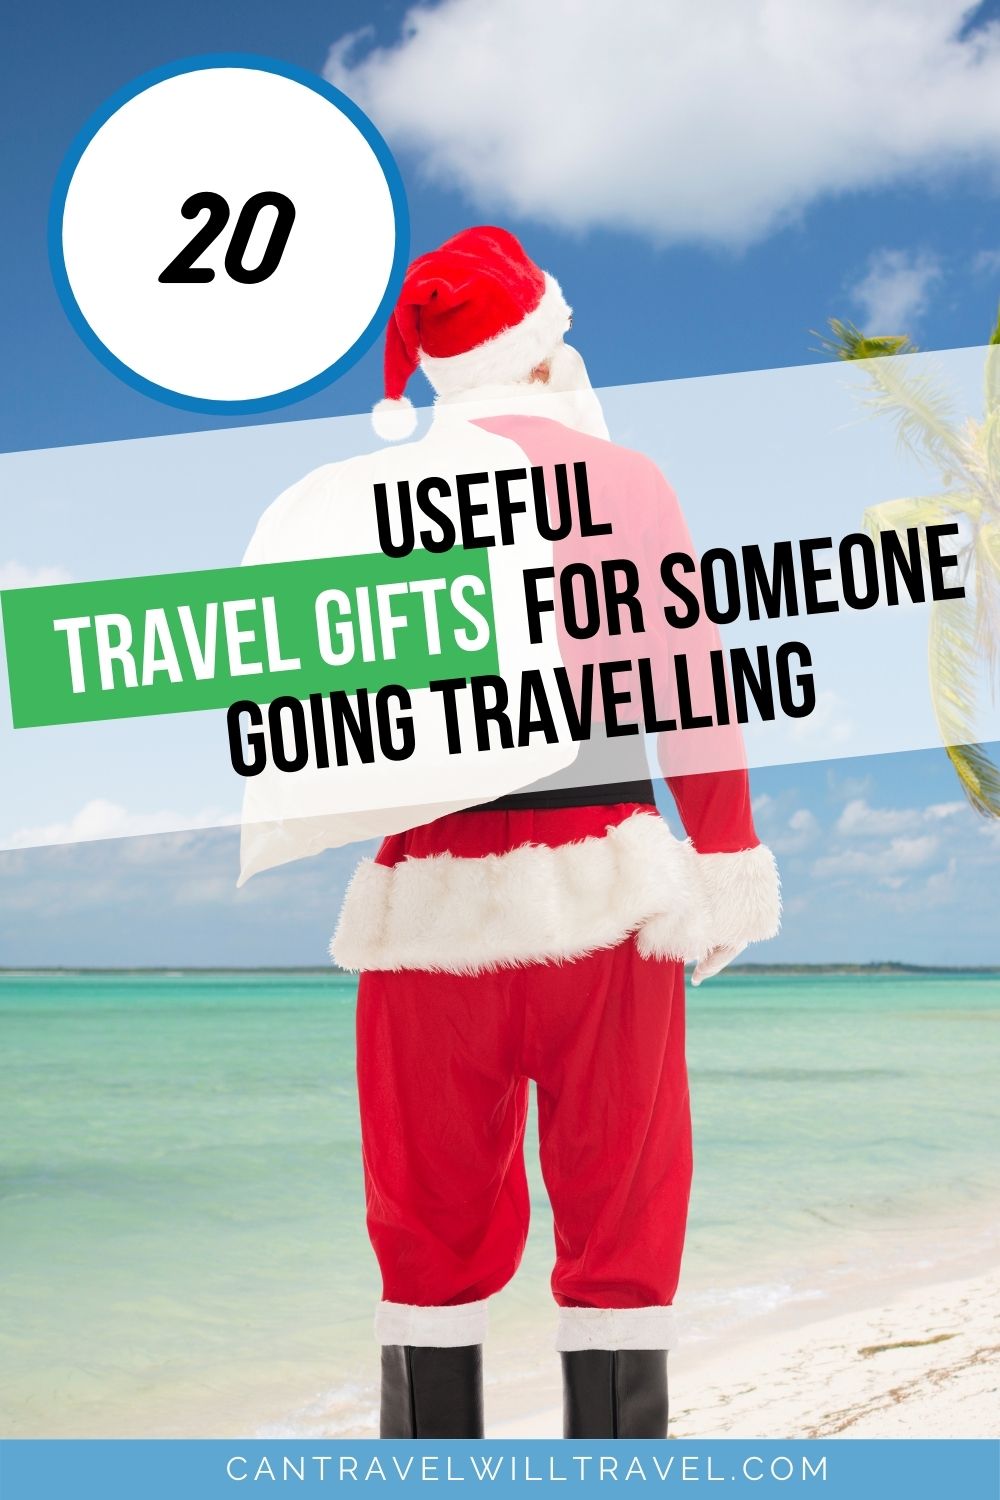 20 Useful Travel Gifts for Someone Going Travelling